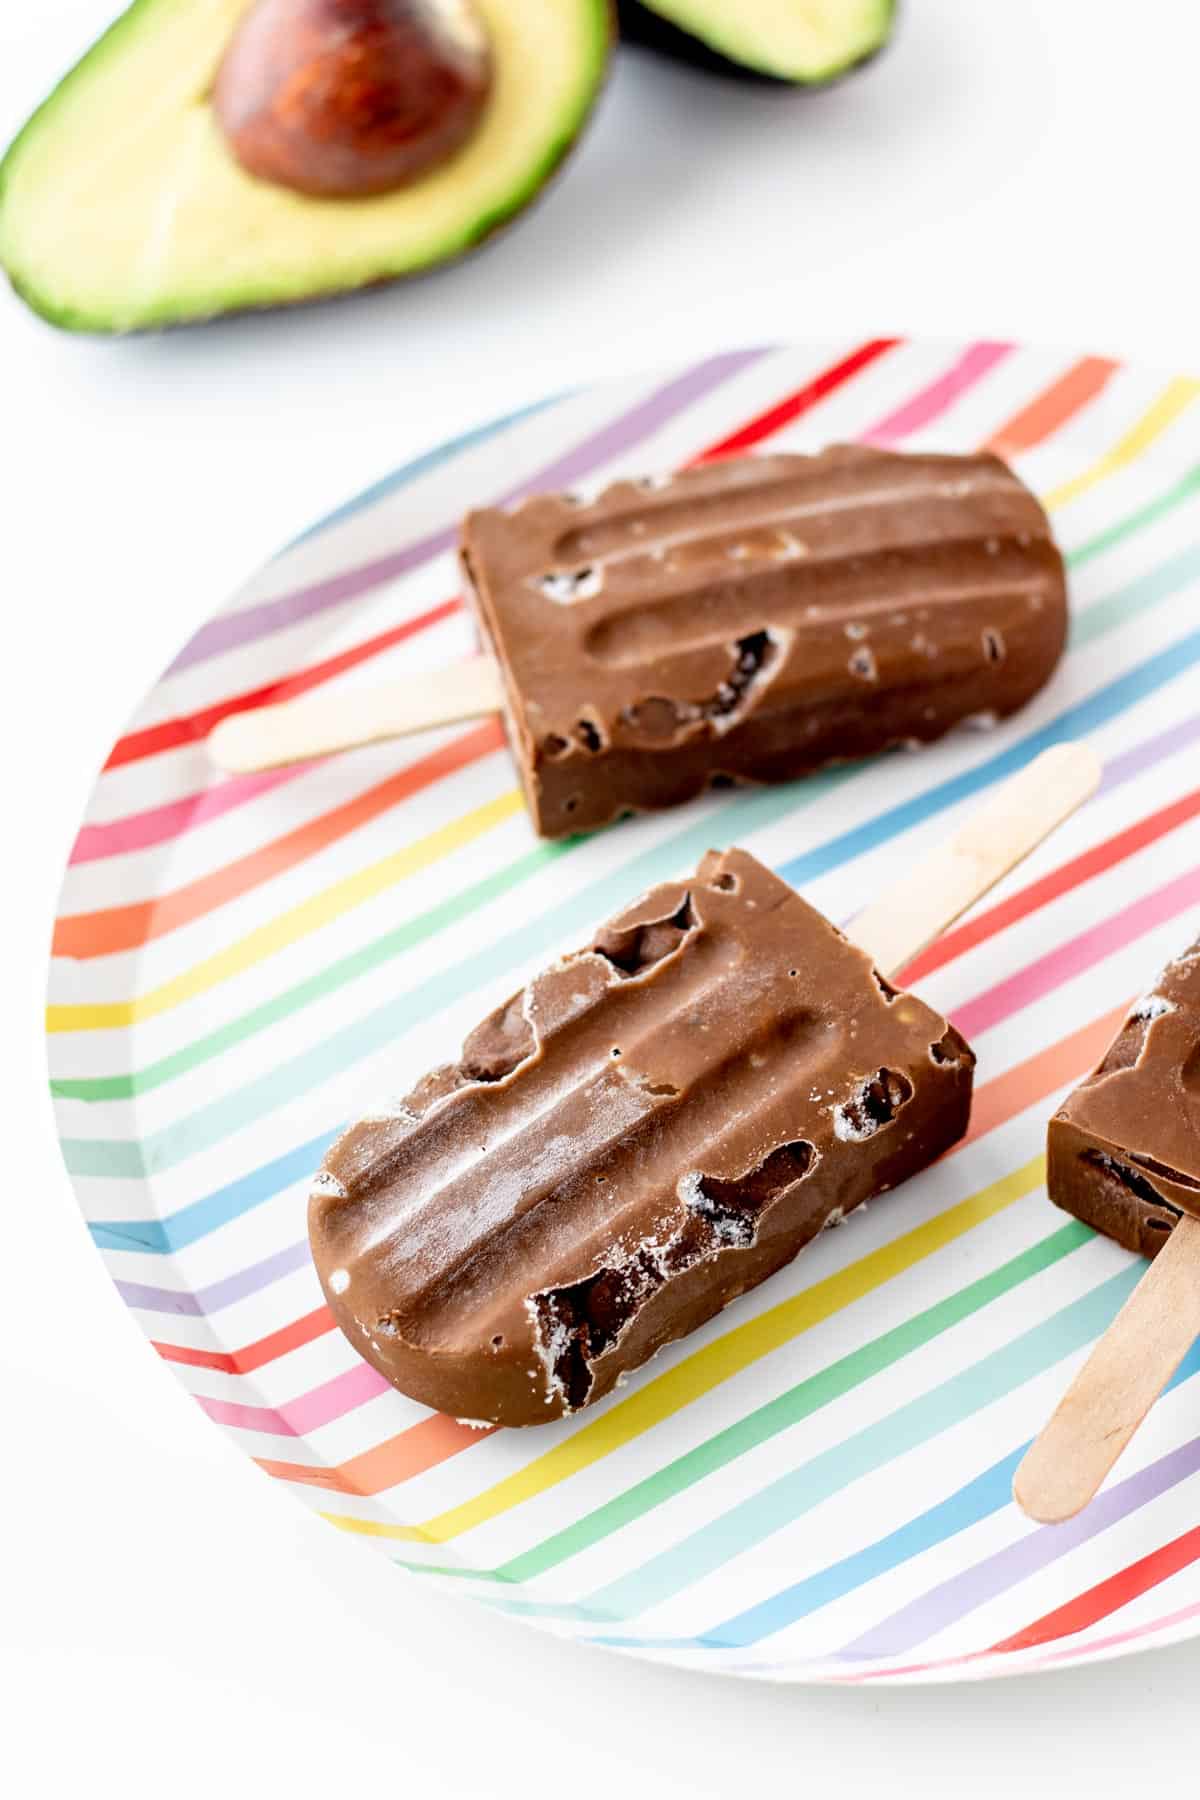 Avocado fudgesicles on a colorful striped plate.